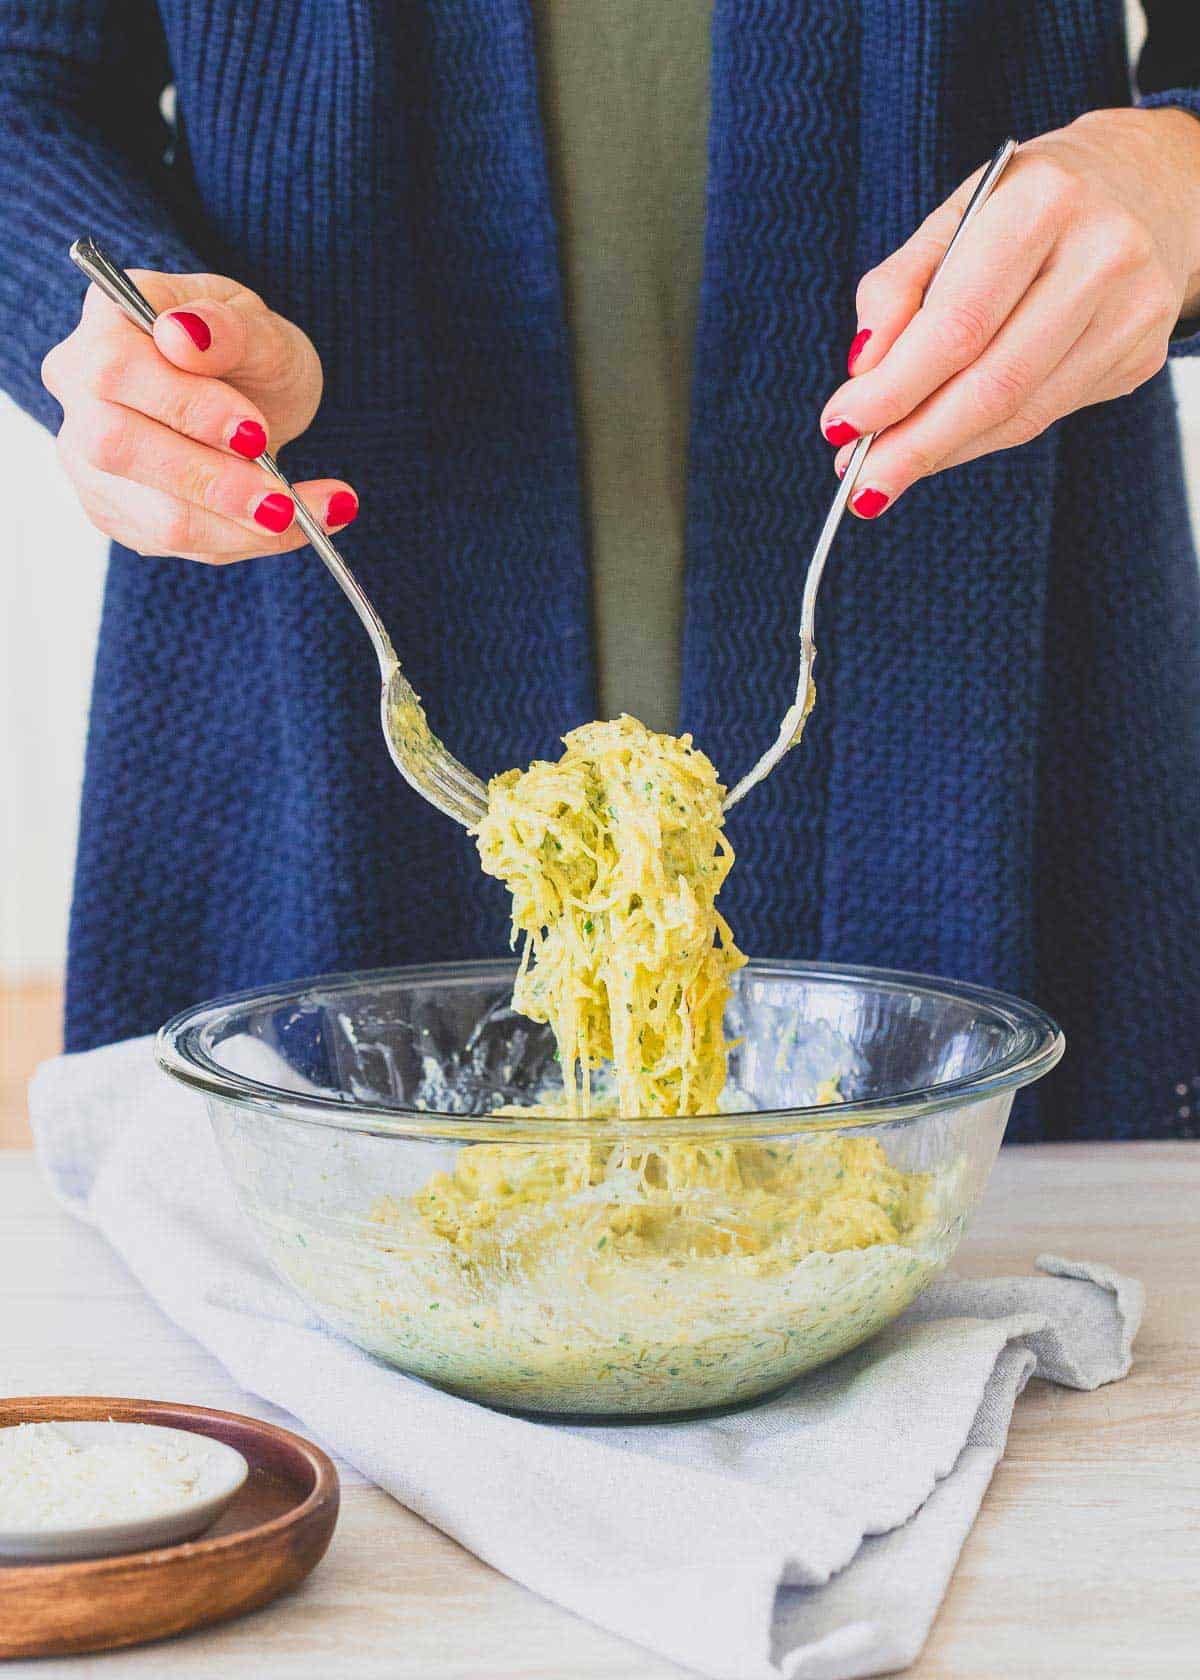 Lower carb spaghetti squash noodles are tossed with a simple basil pesto and creamy ricotta for an indulgent, healthier "pasta" meal.